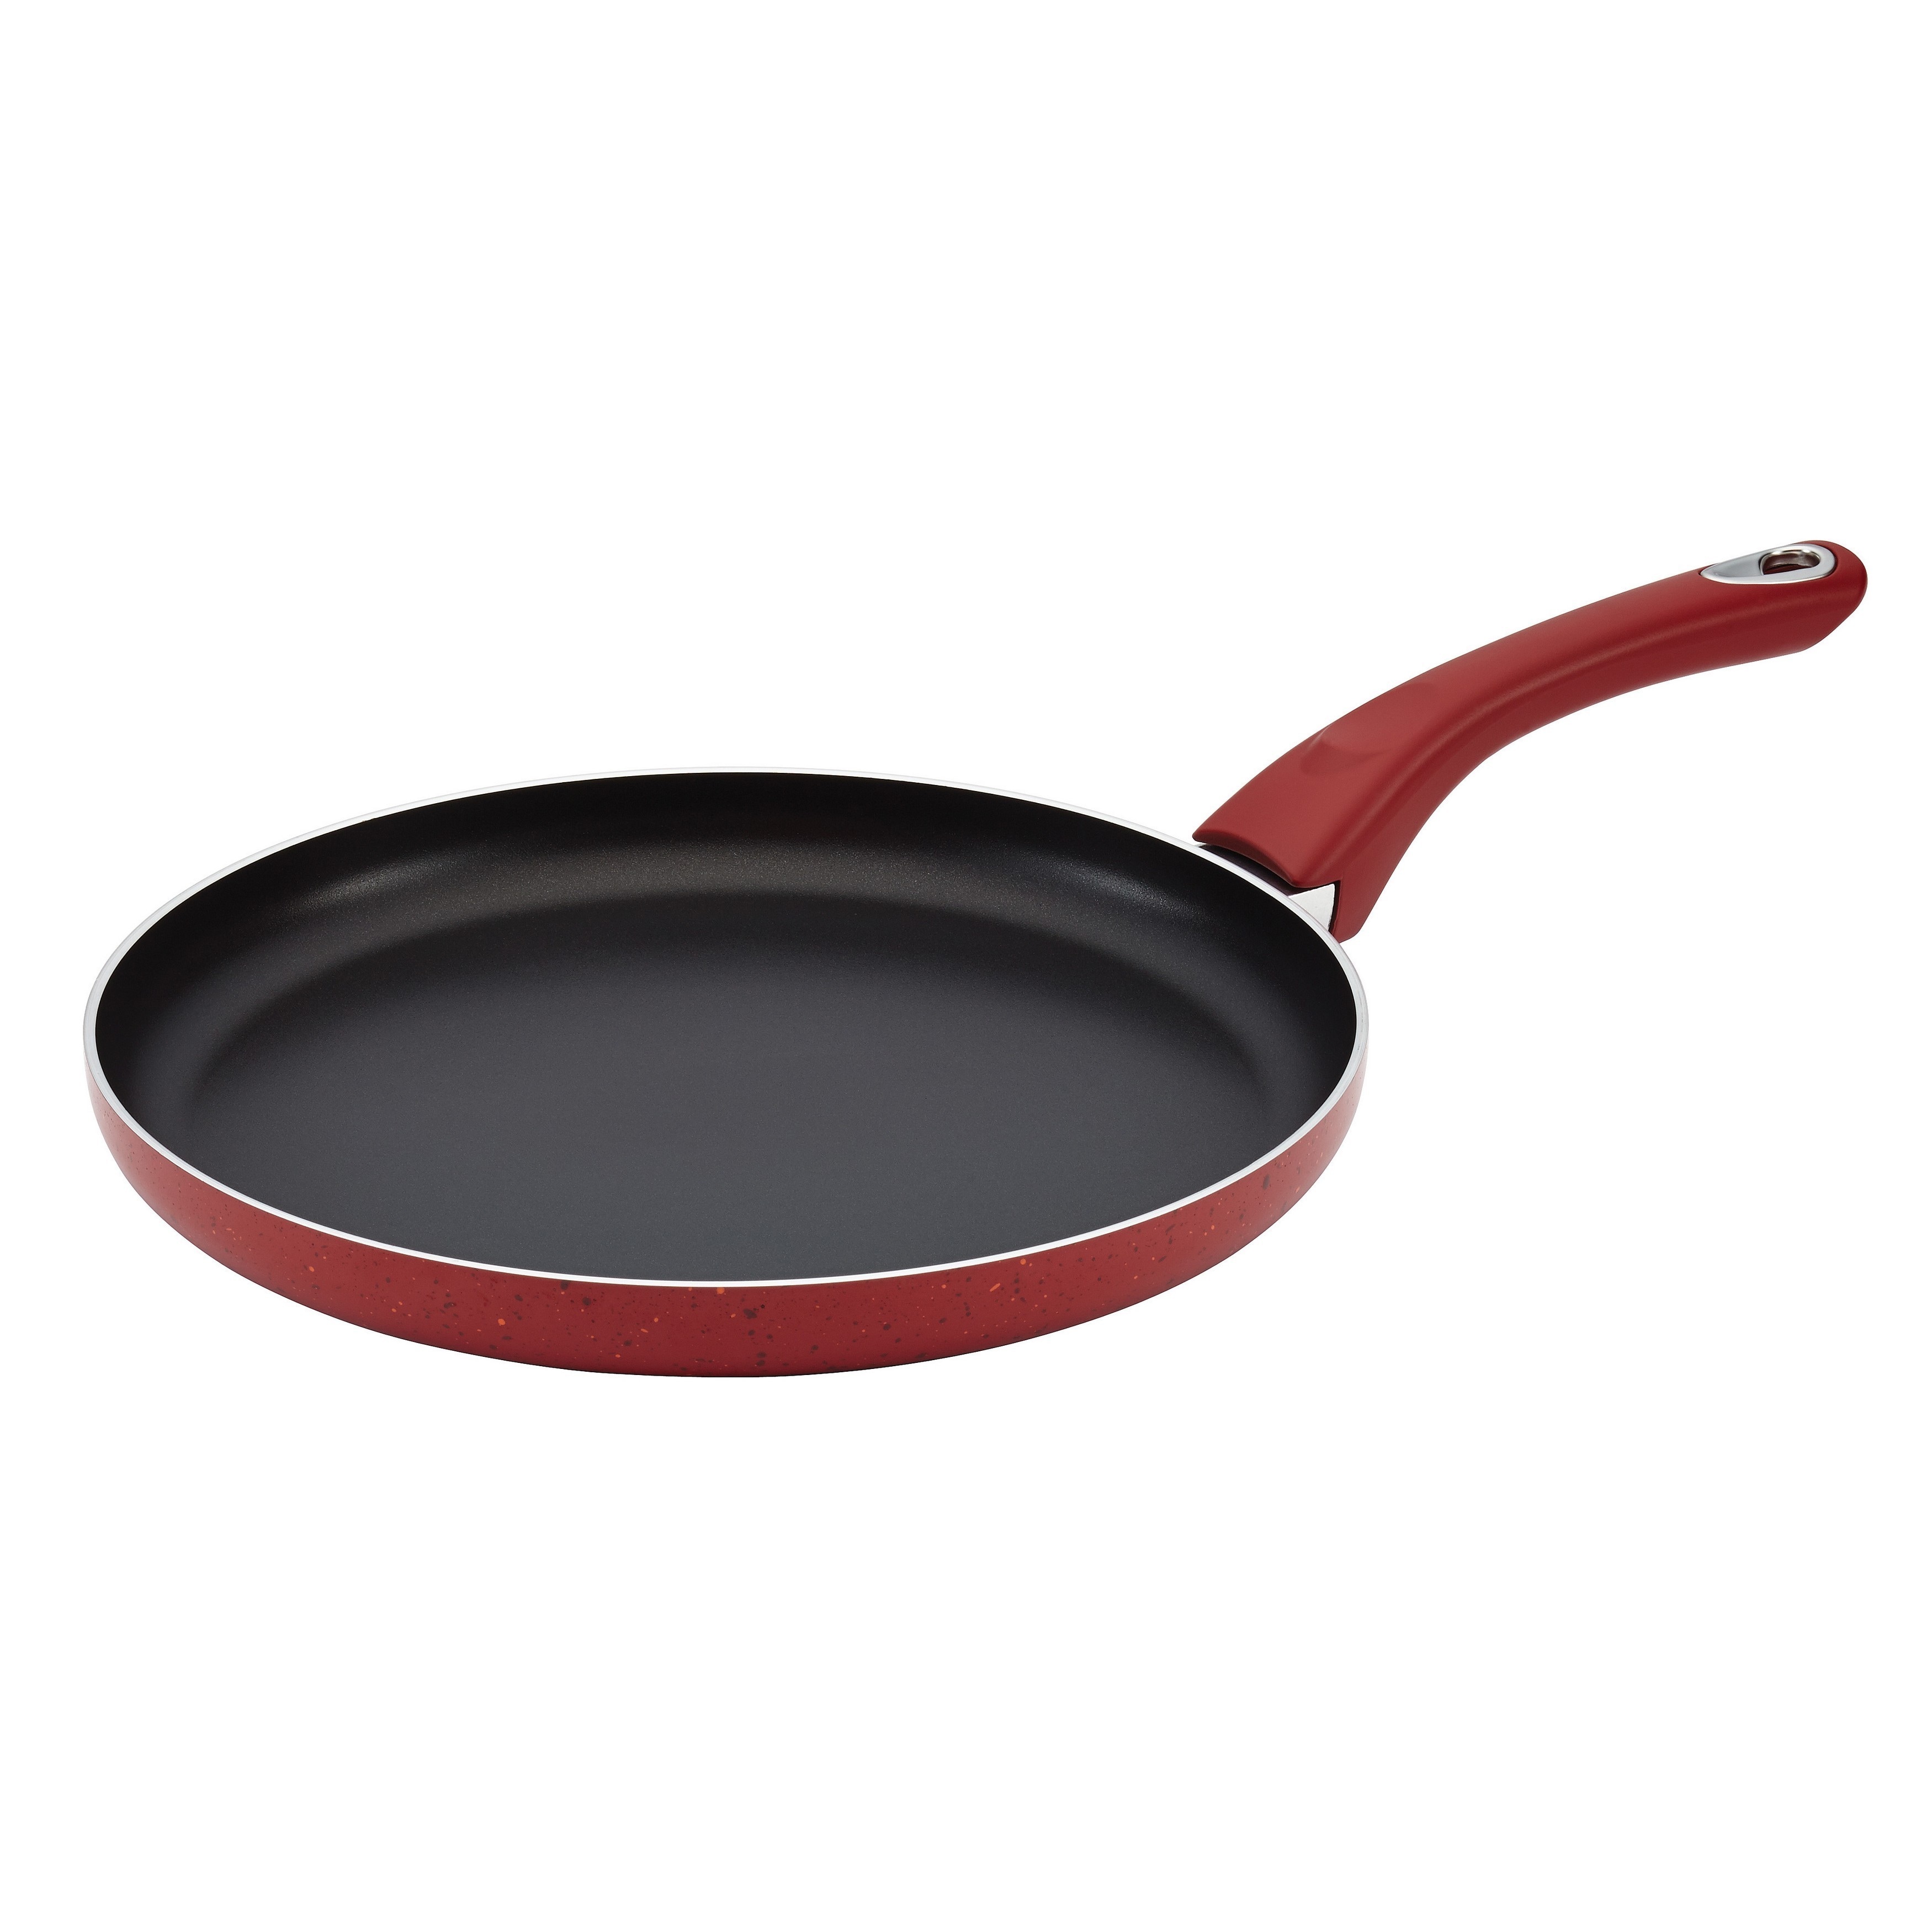 Farberware New Traditions Speckled Aluminum Nonstick 10 1/2-inch Red Round Griddle